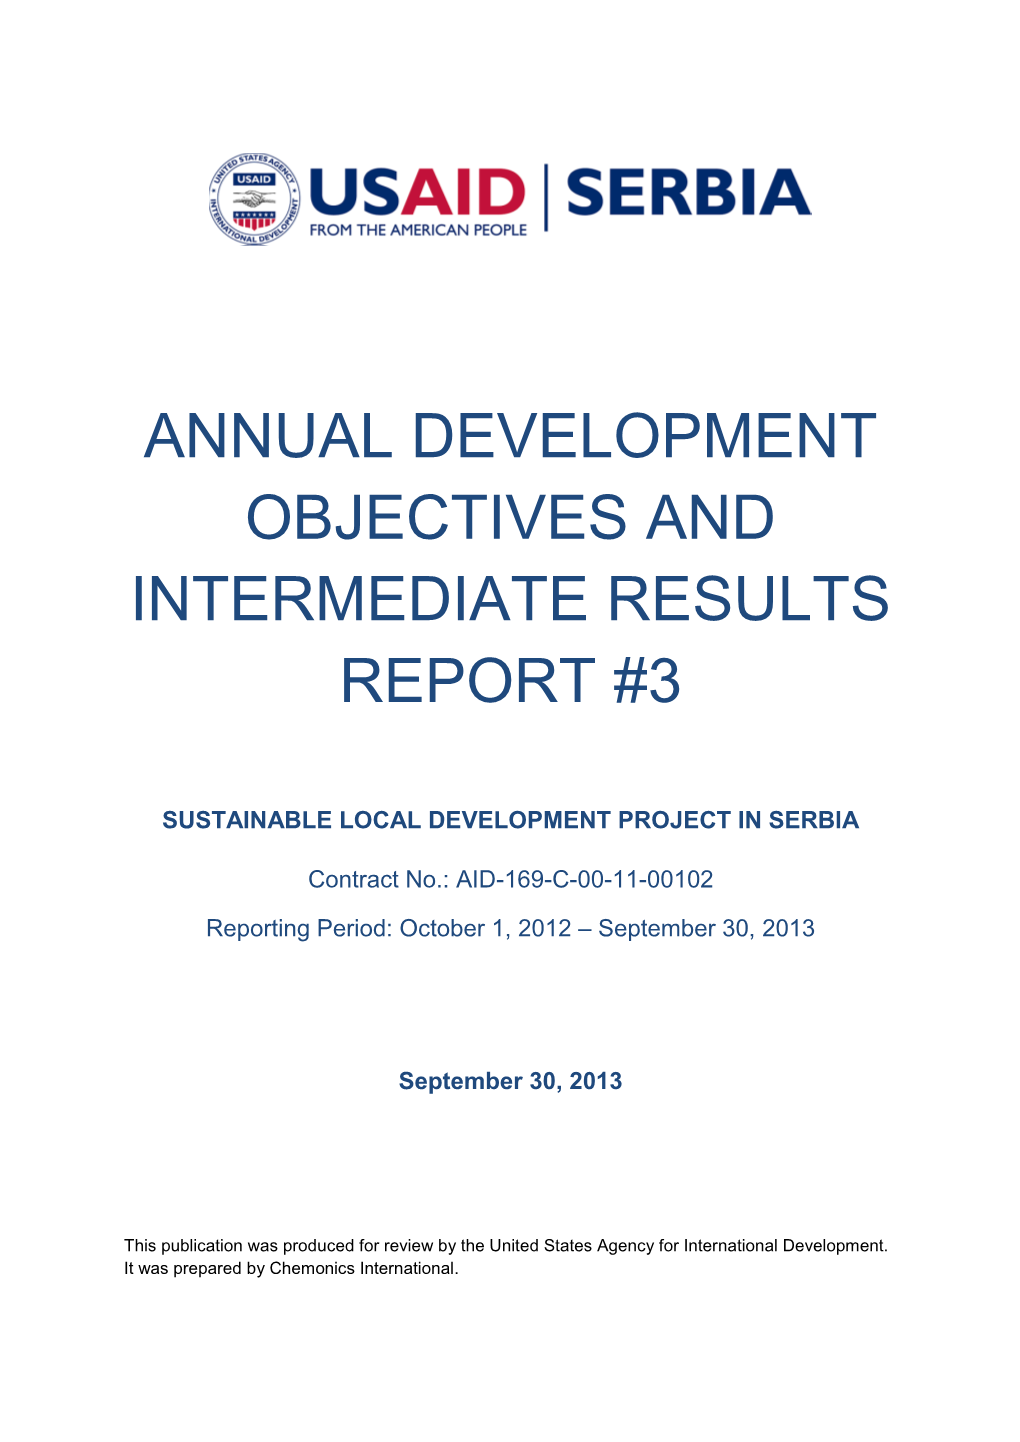 Annual Development Objectives and Intermediate Results Report #3